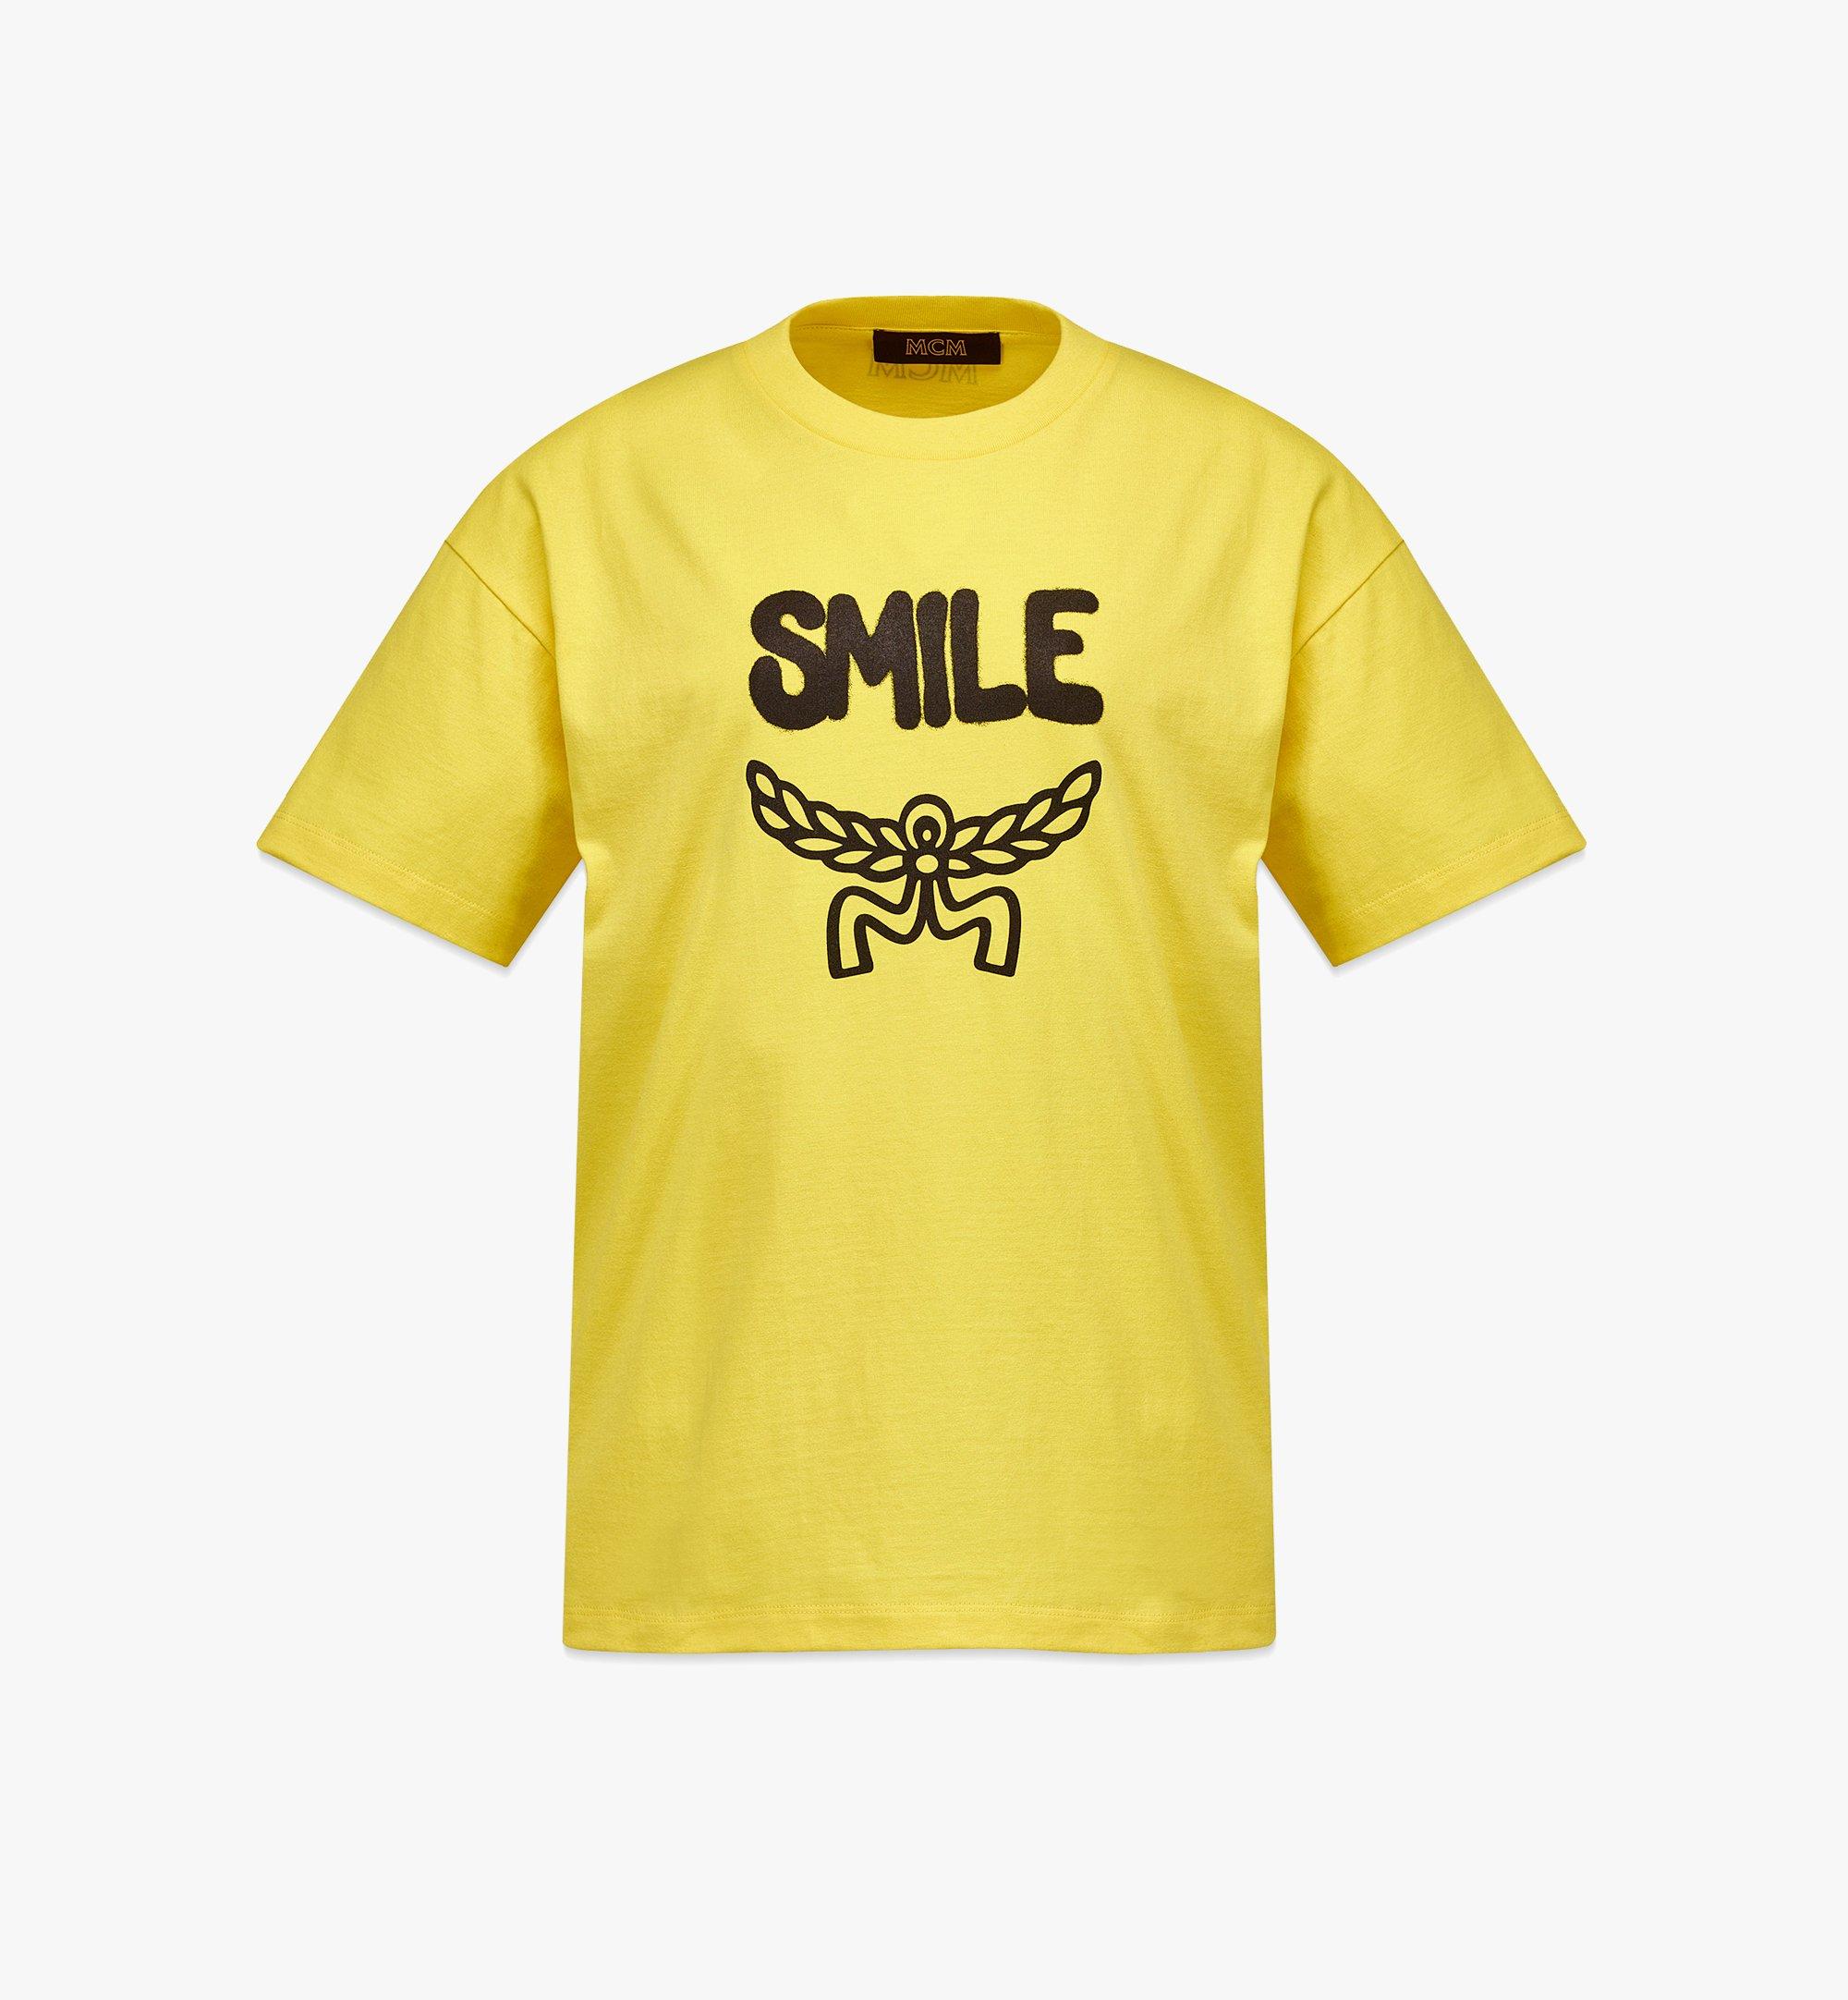 MCM Women’s MCM Collection Smile T-Shirt in Organic Cotton Yellow MFTCSMM02Y300L Alternate View 1